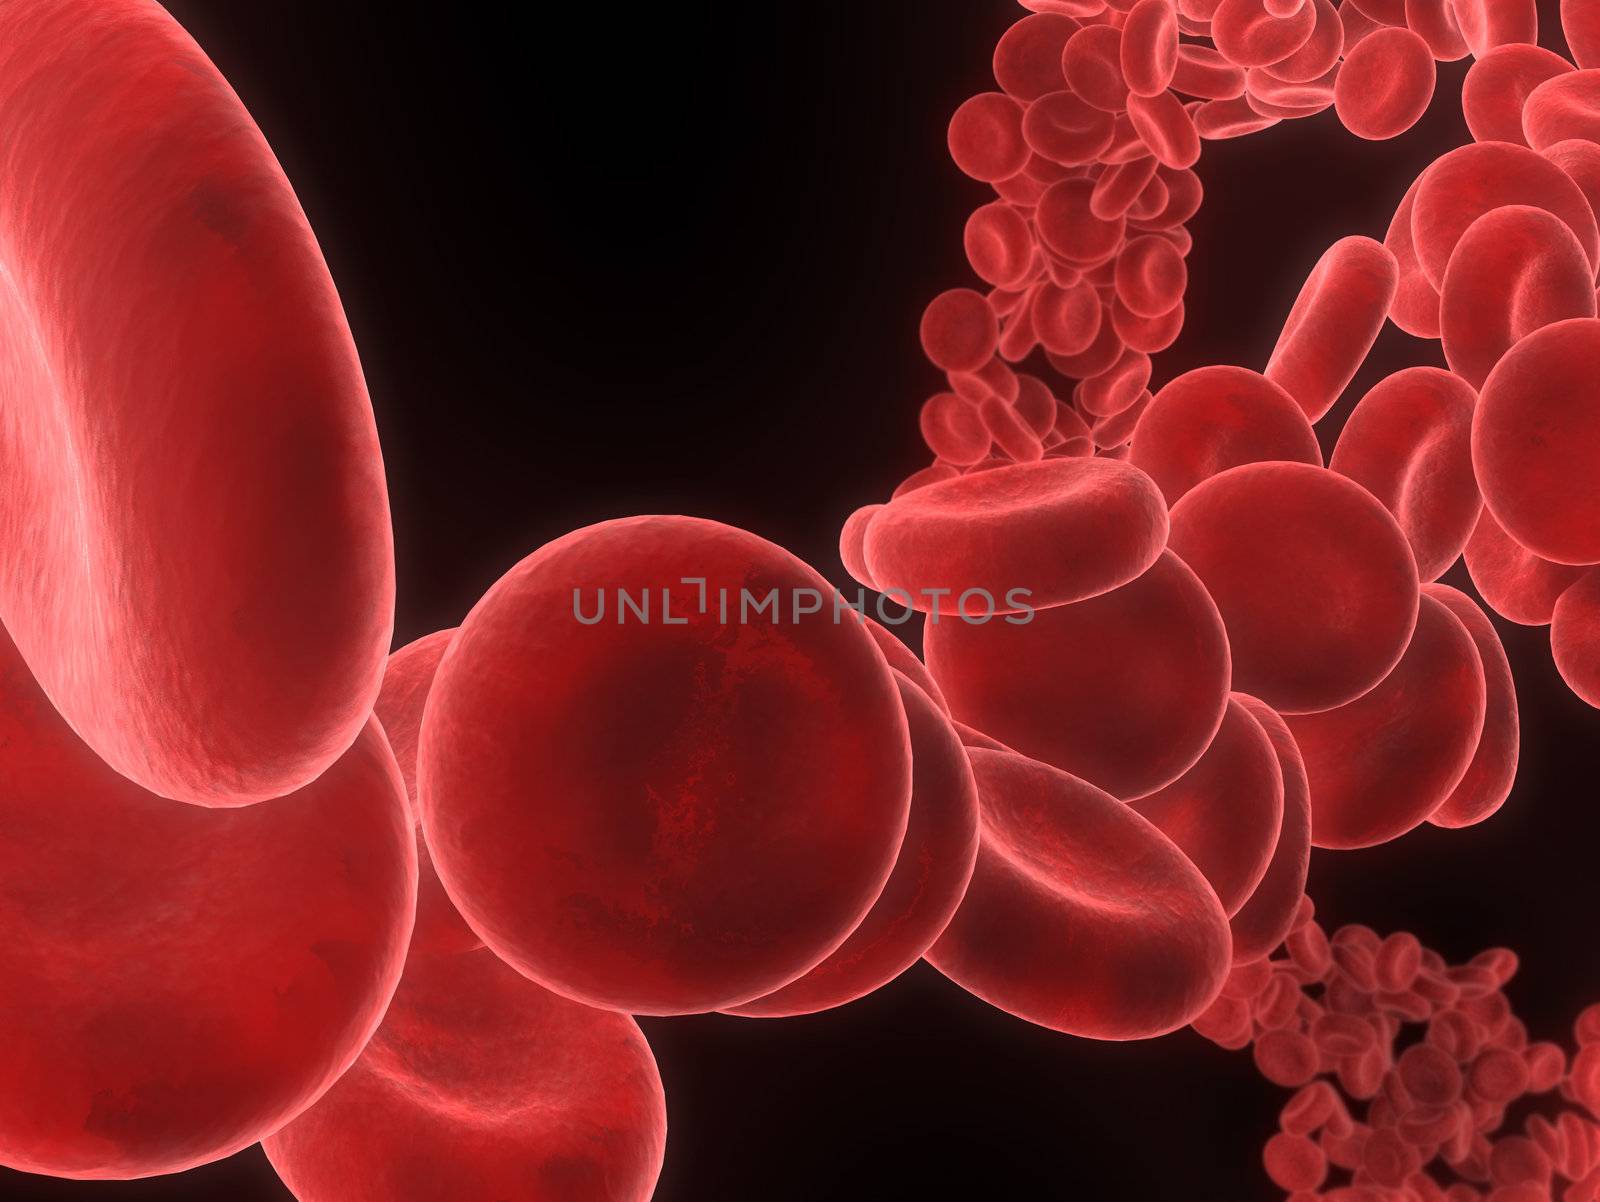 3d rendered illustration of many streaming red blood cells